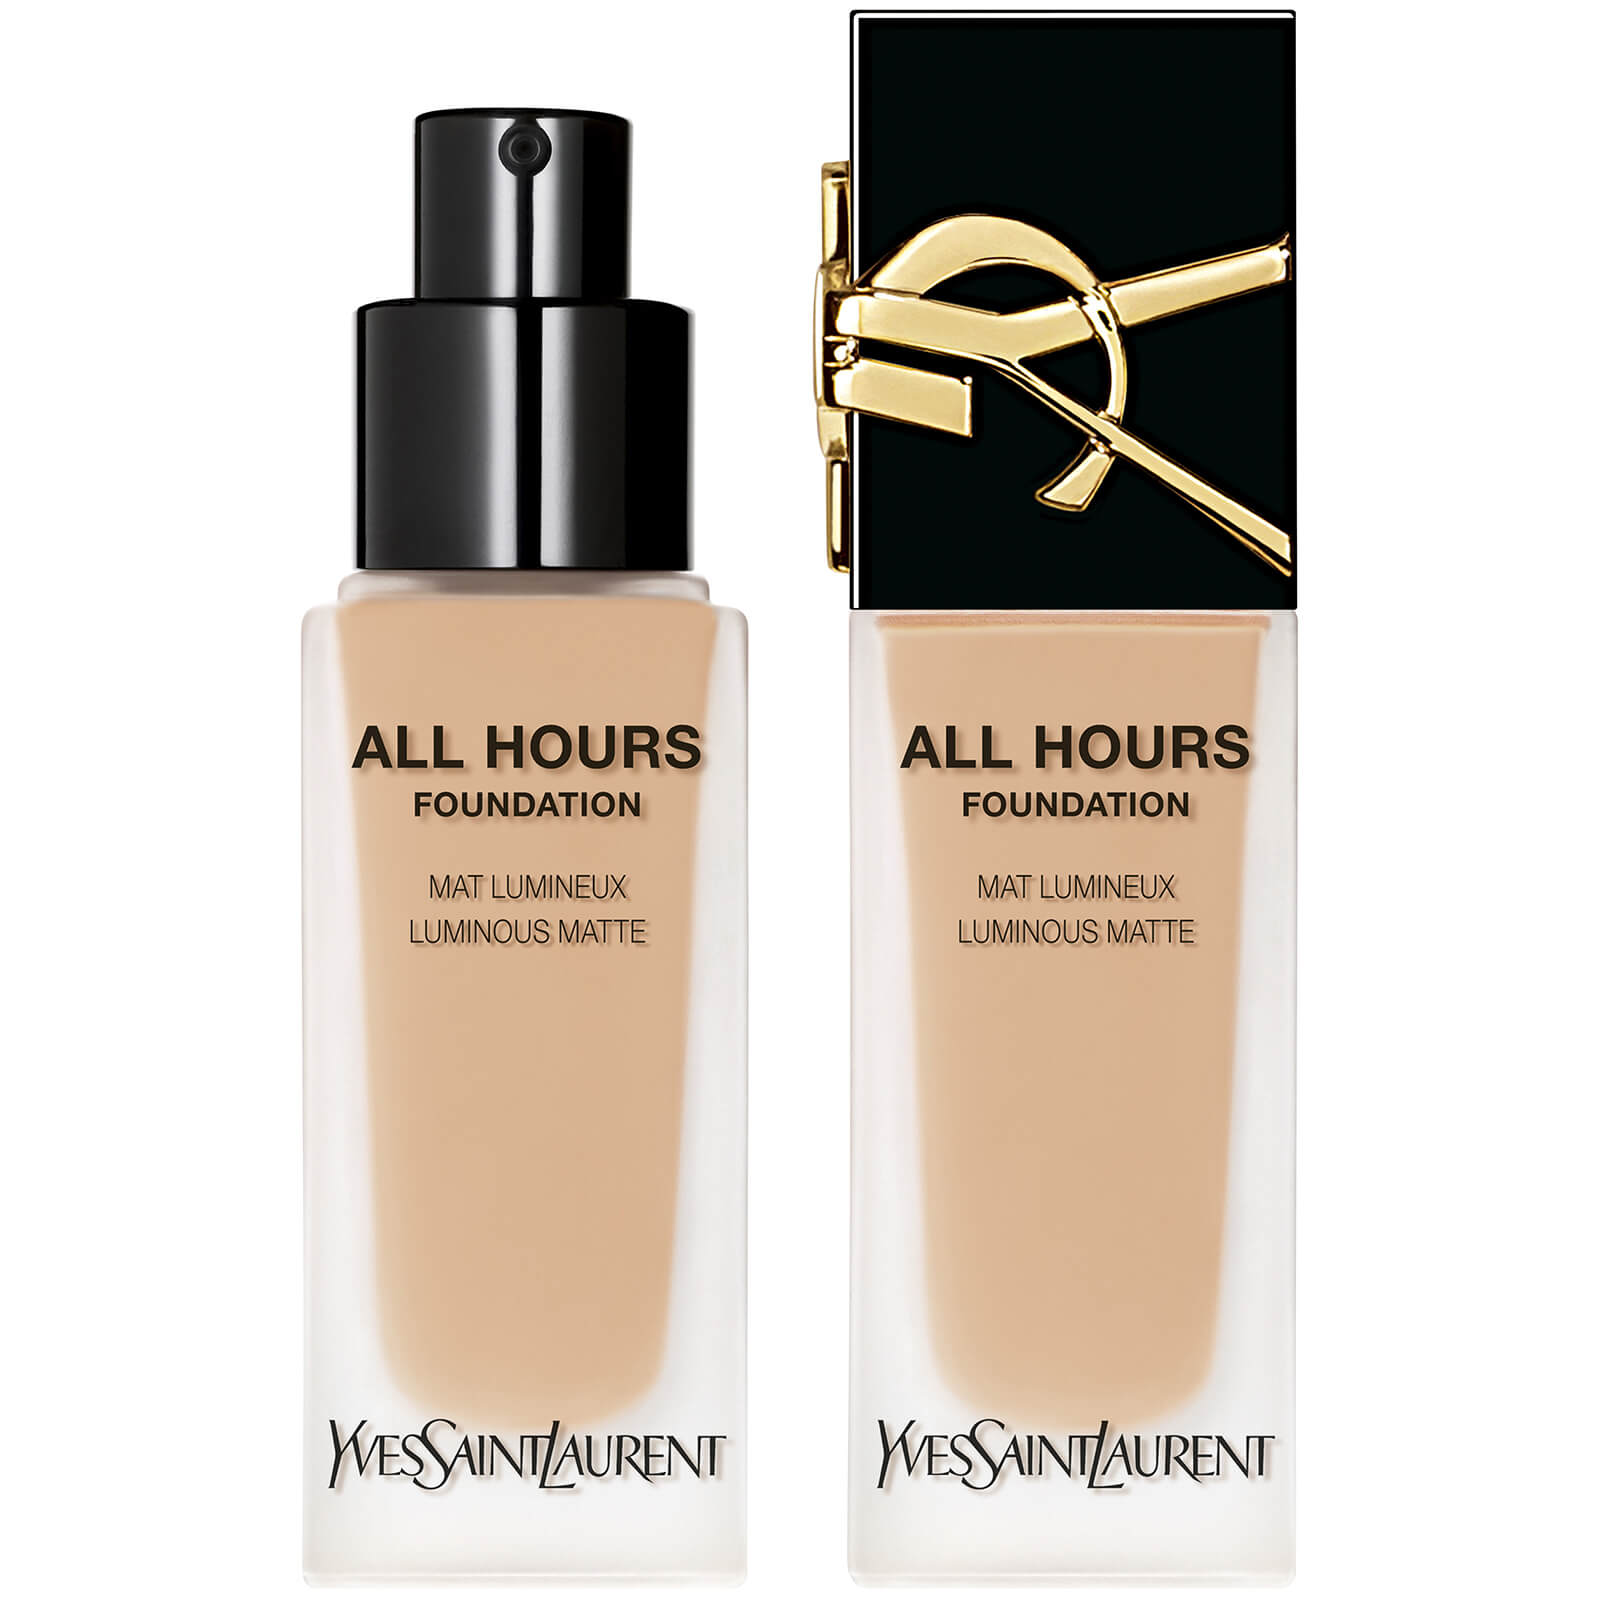 Yves Saint Laurent All Hours Luminous Matte Foundation with SPF 39 25ml (Various Shades) - LN8